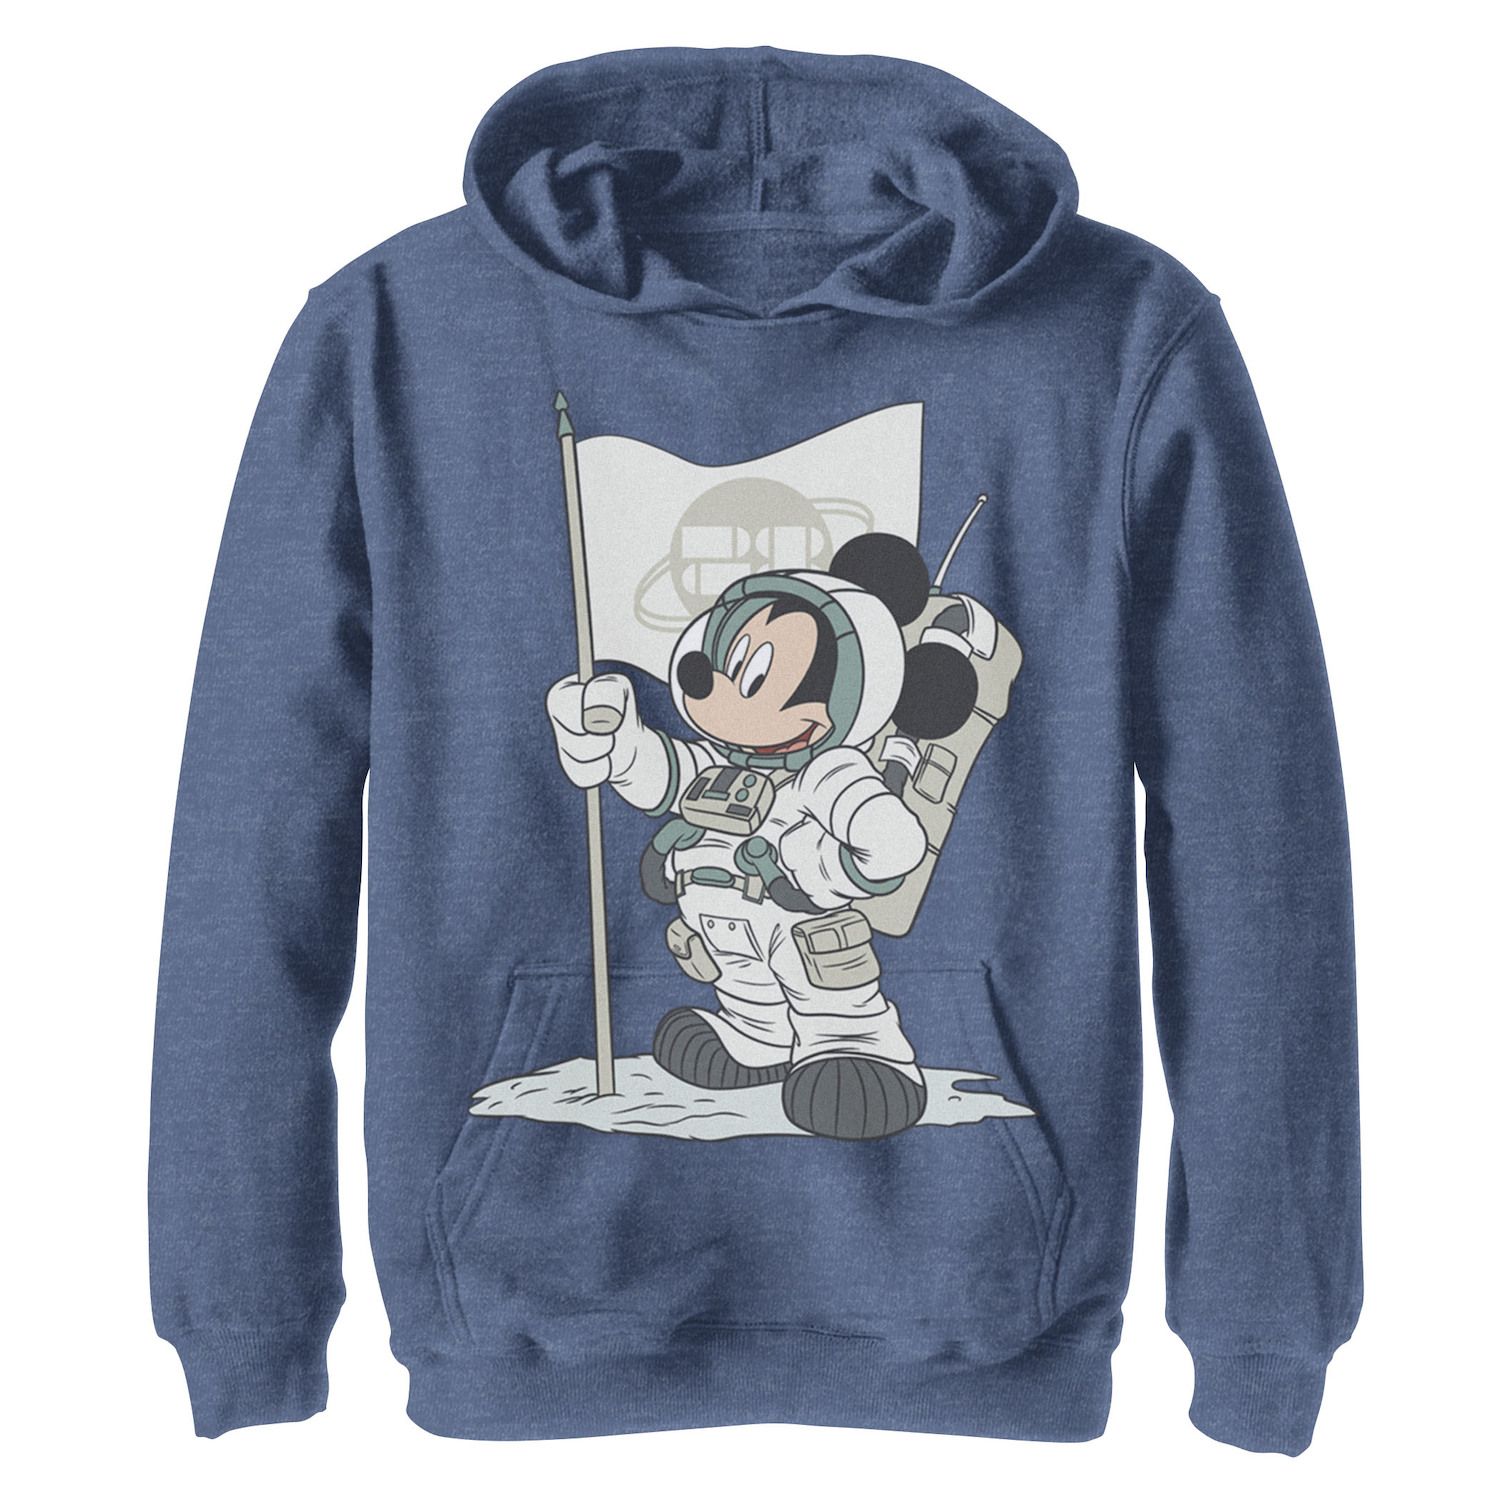 Image for Disney 's Mickey Mouse Boys 8-20 Astronaut Outfit Pullover Graphic Hoodie at Kohl's.